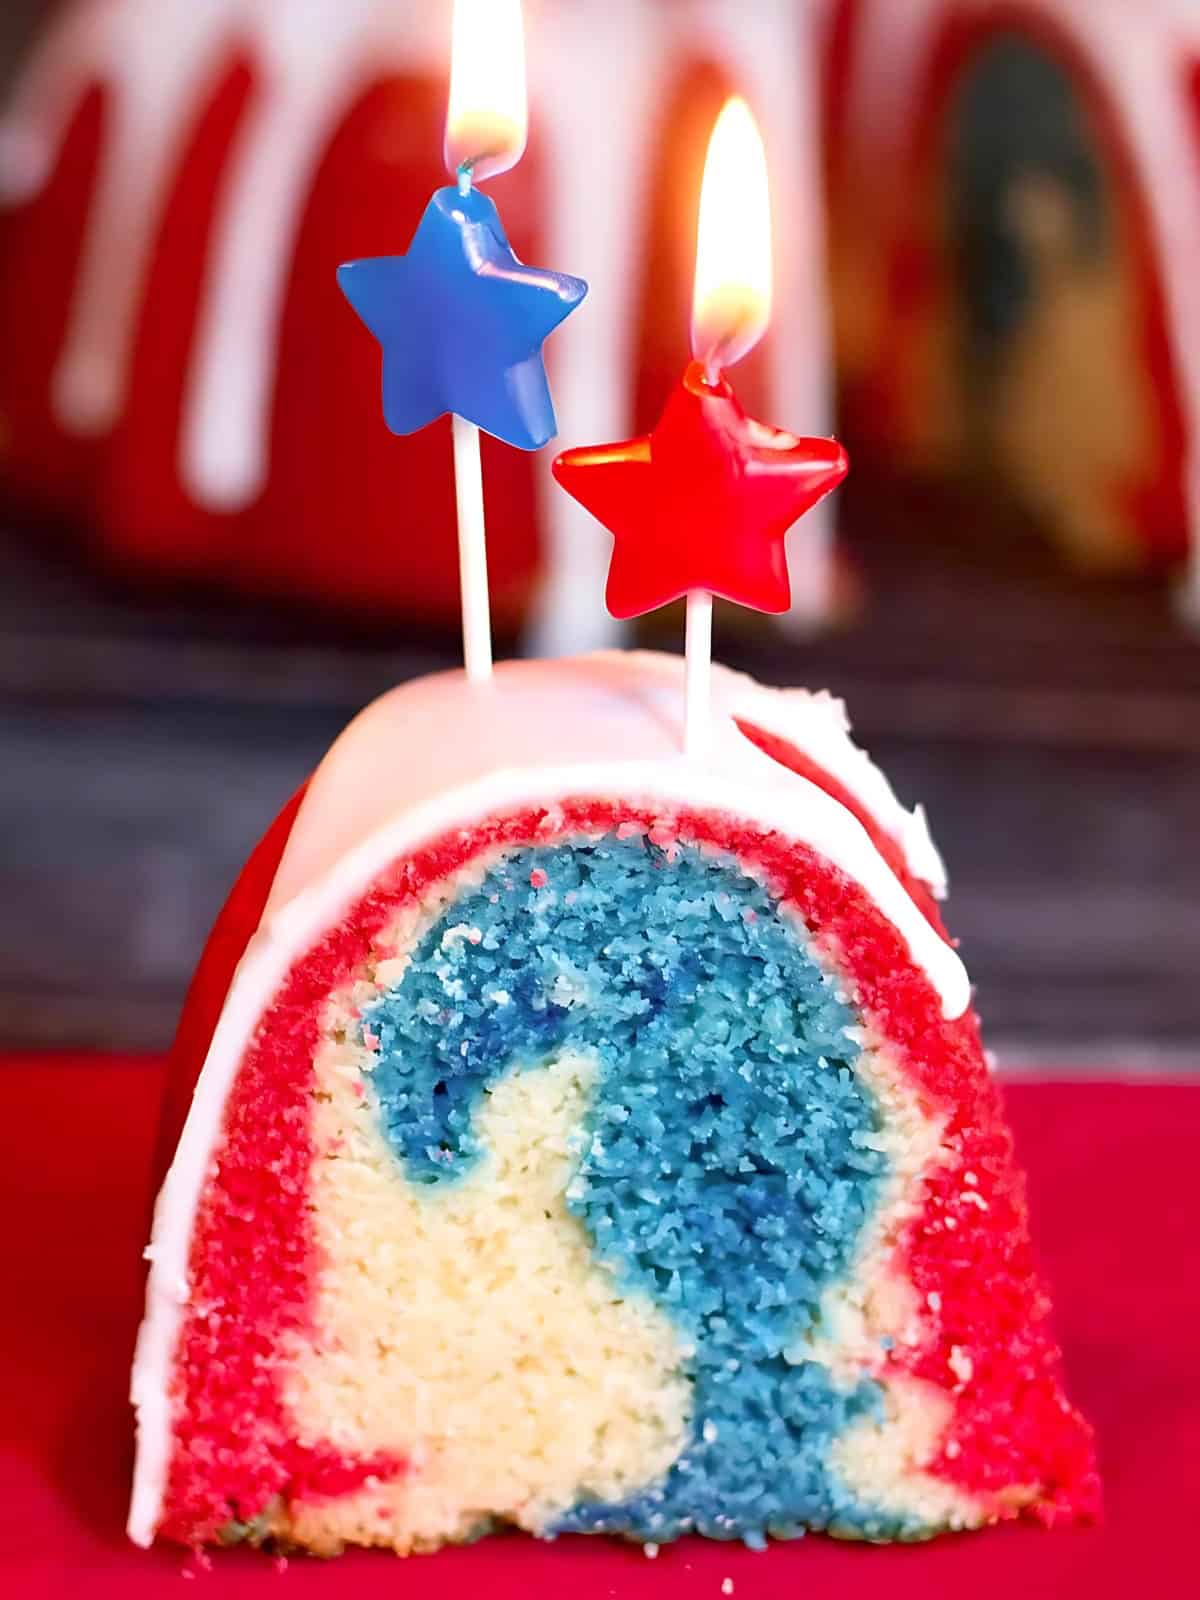 Red white and blue swirl bundt cake with star shaped candles on top.